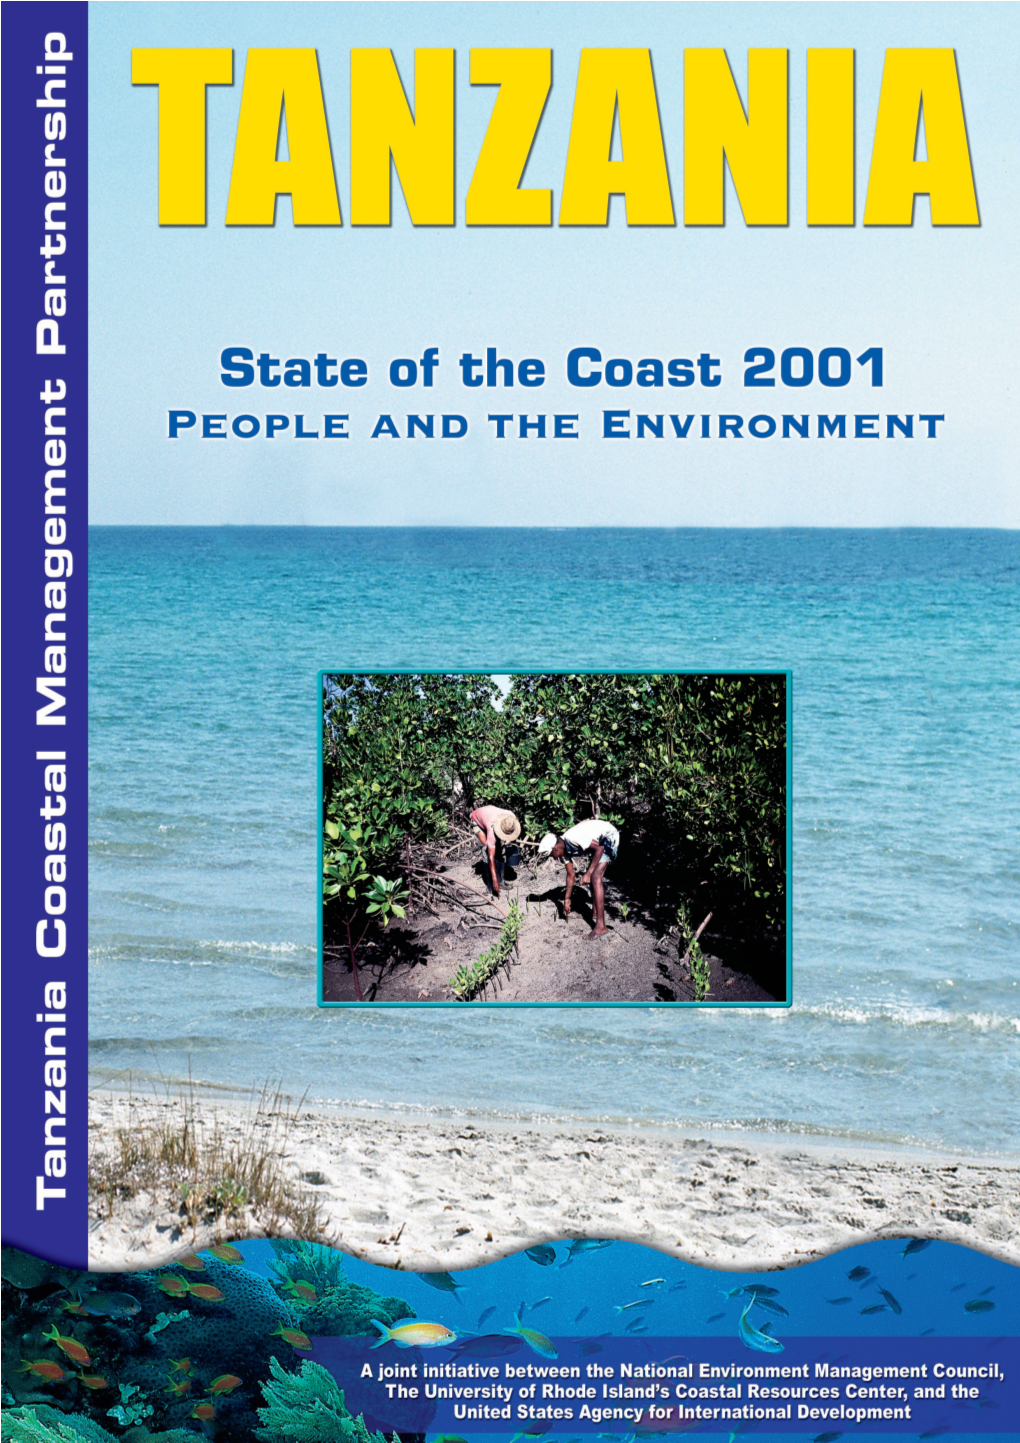 Tanzania State of the Coast 2001: People and the Environment